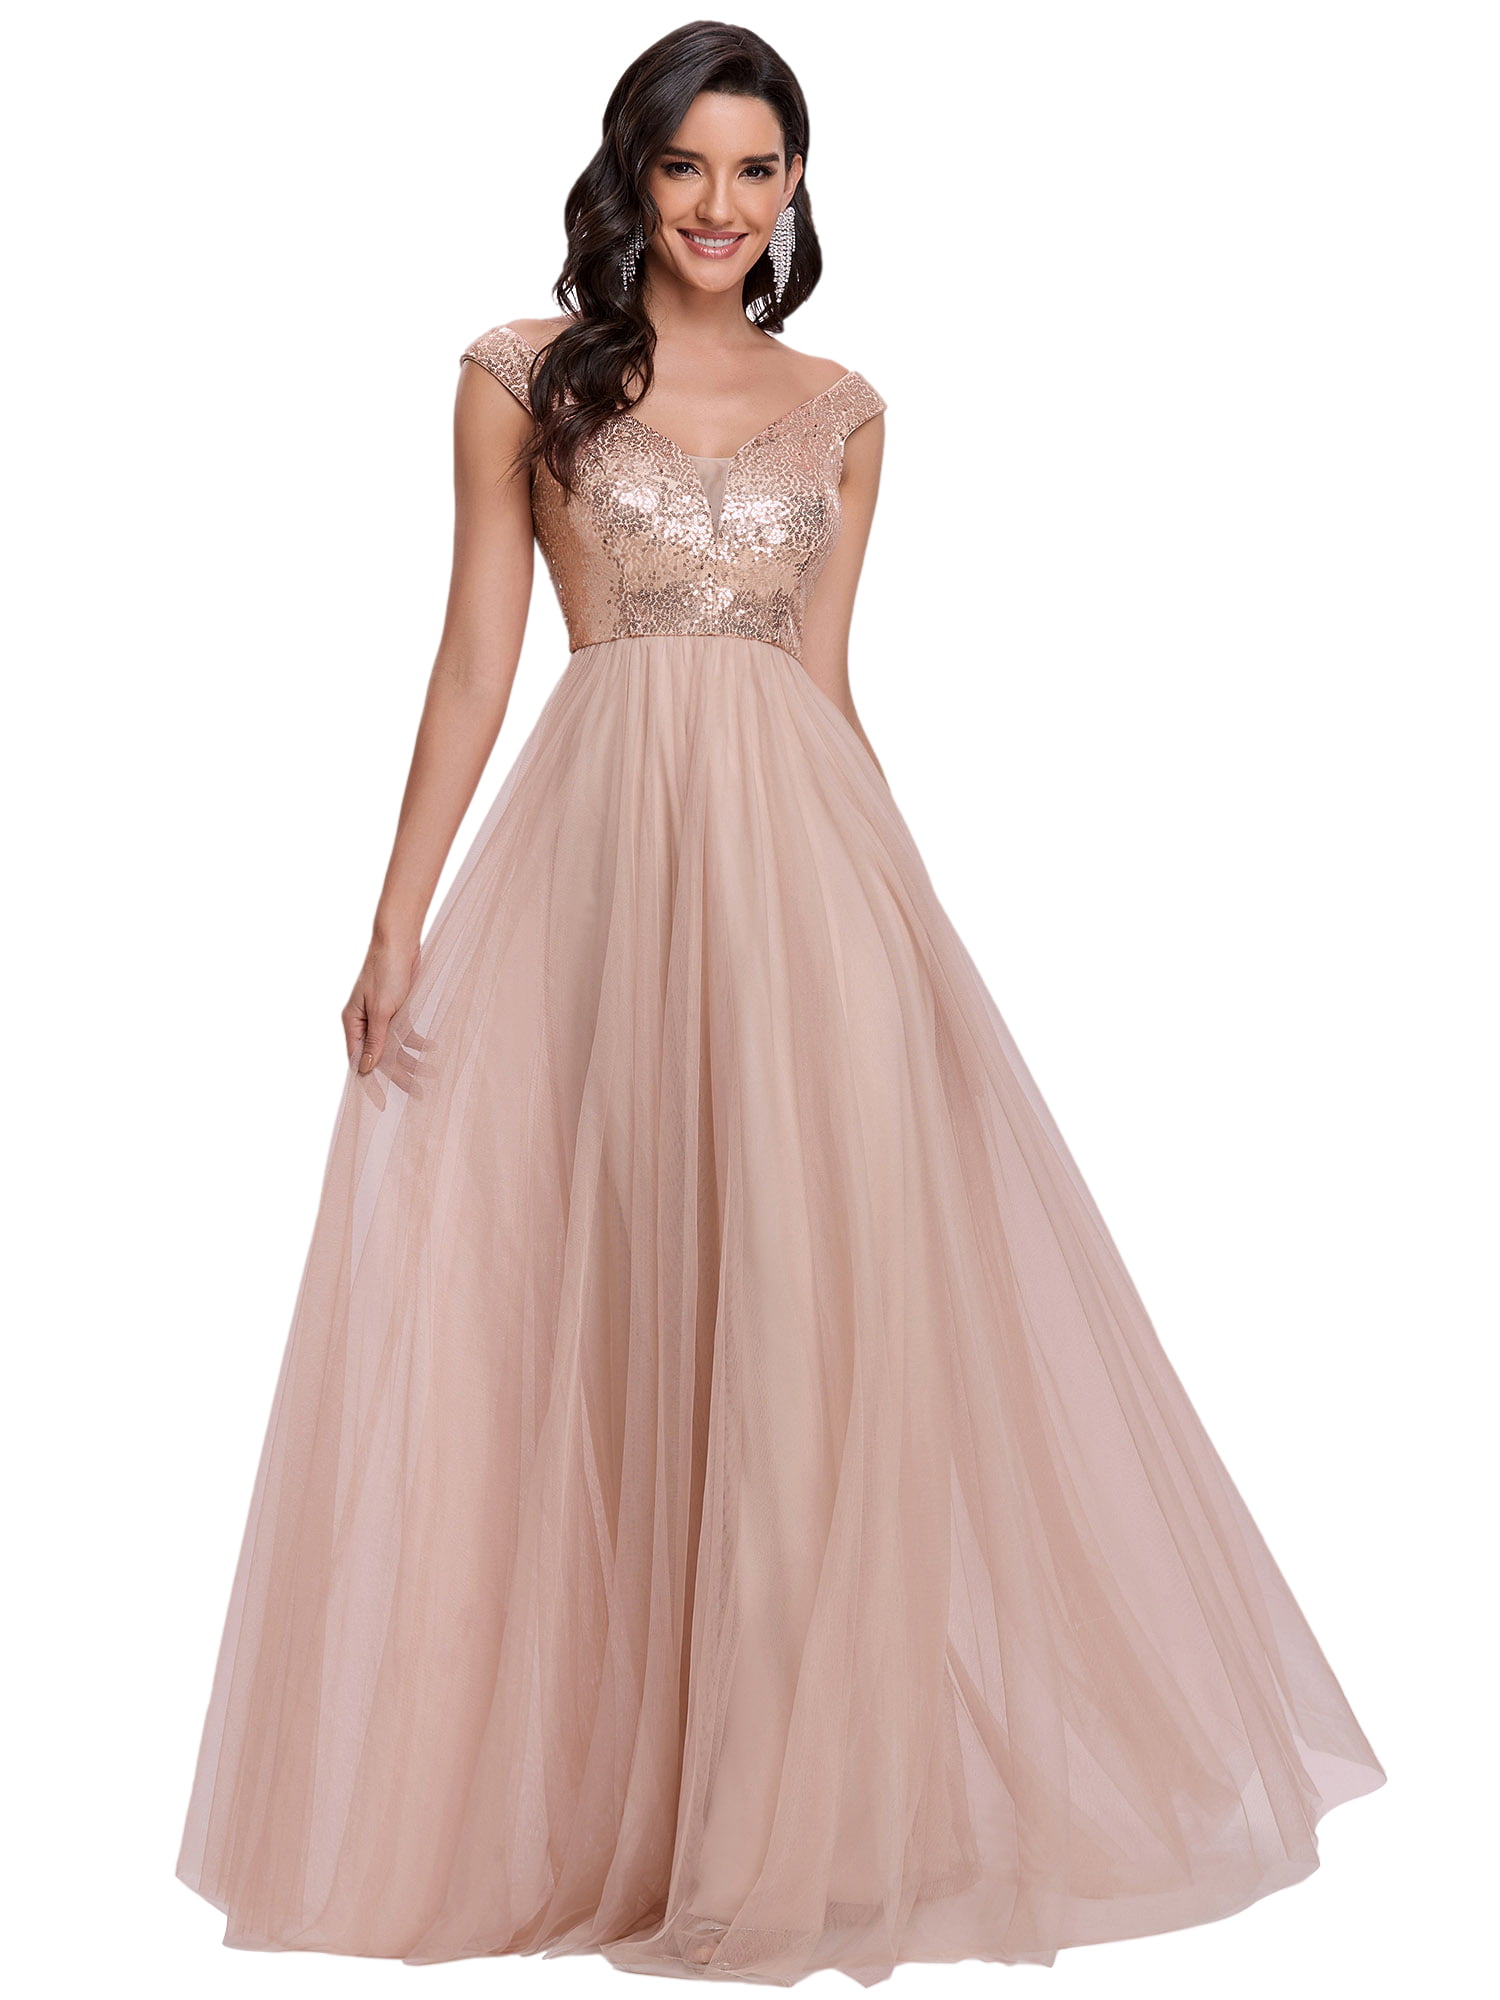 LONG BRIDESMAID PARTY COCKTAIL EVENING PROM BUCKLE WOMENS MAXI DRESS PLUS SIZE 